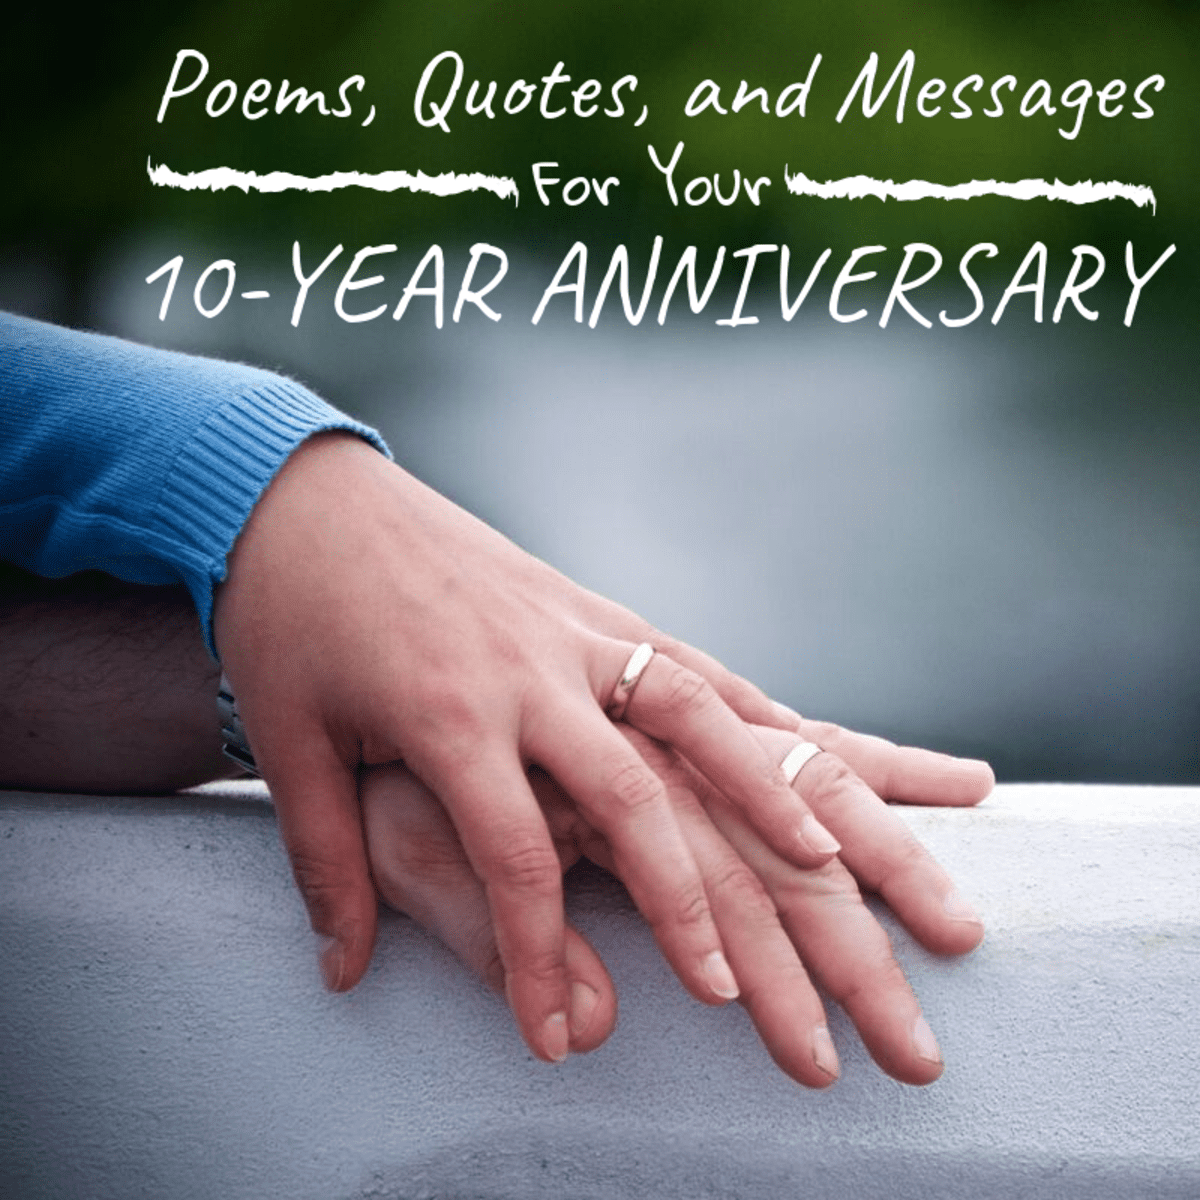 10th Anniversary Wishes, Quotes, and Poems to Write in a Card ...